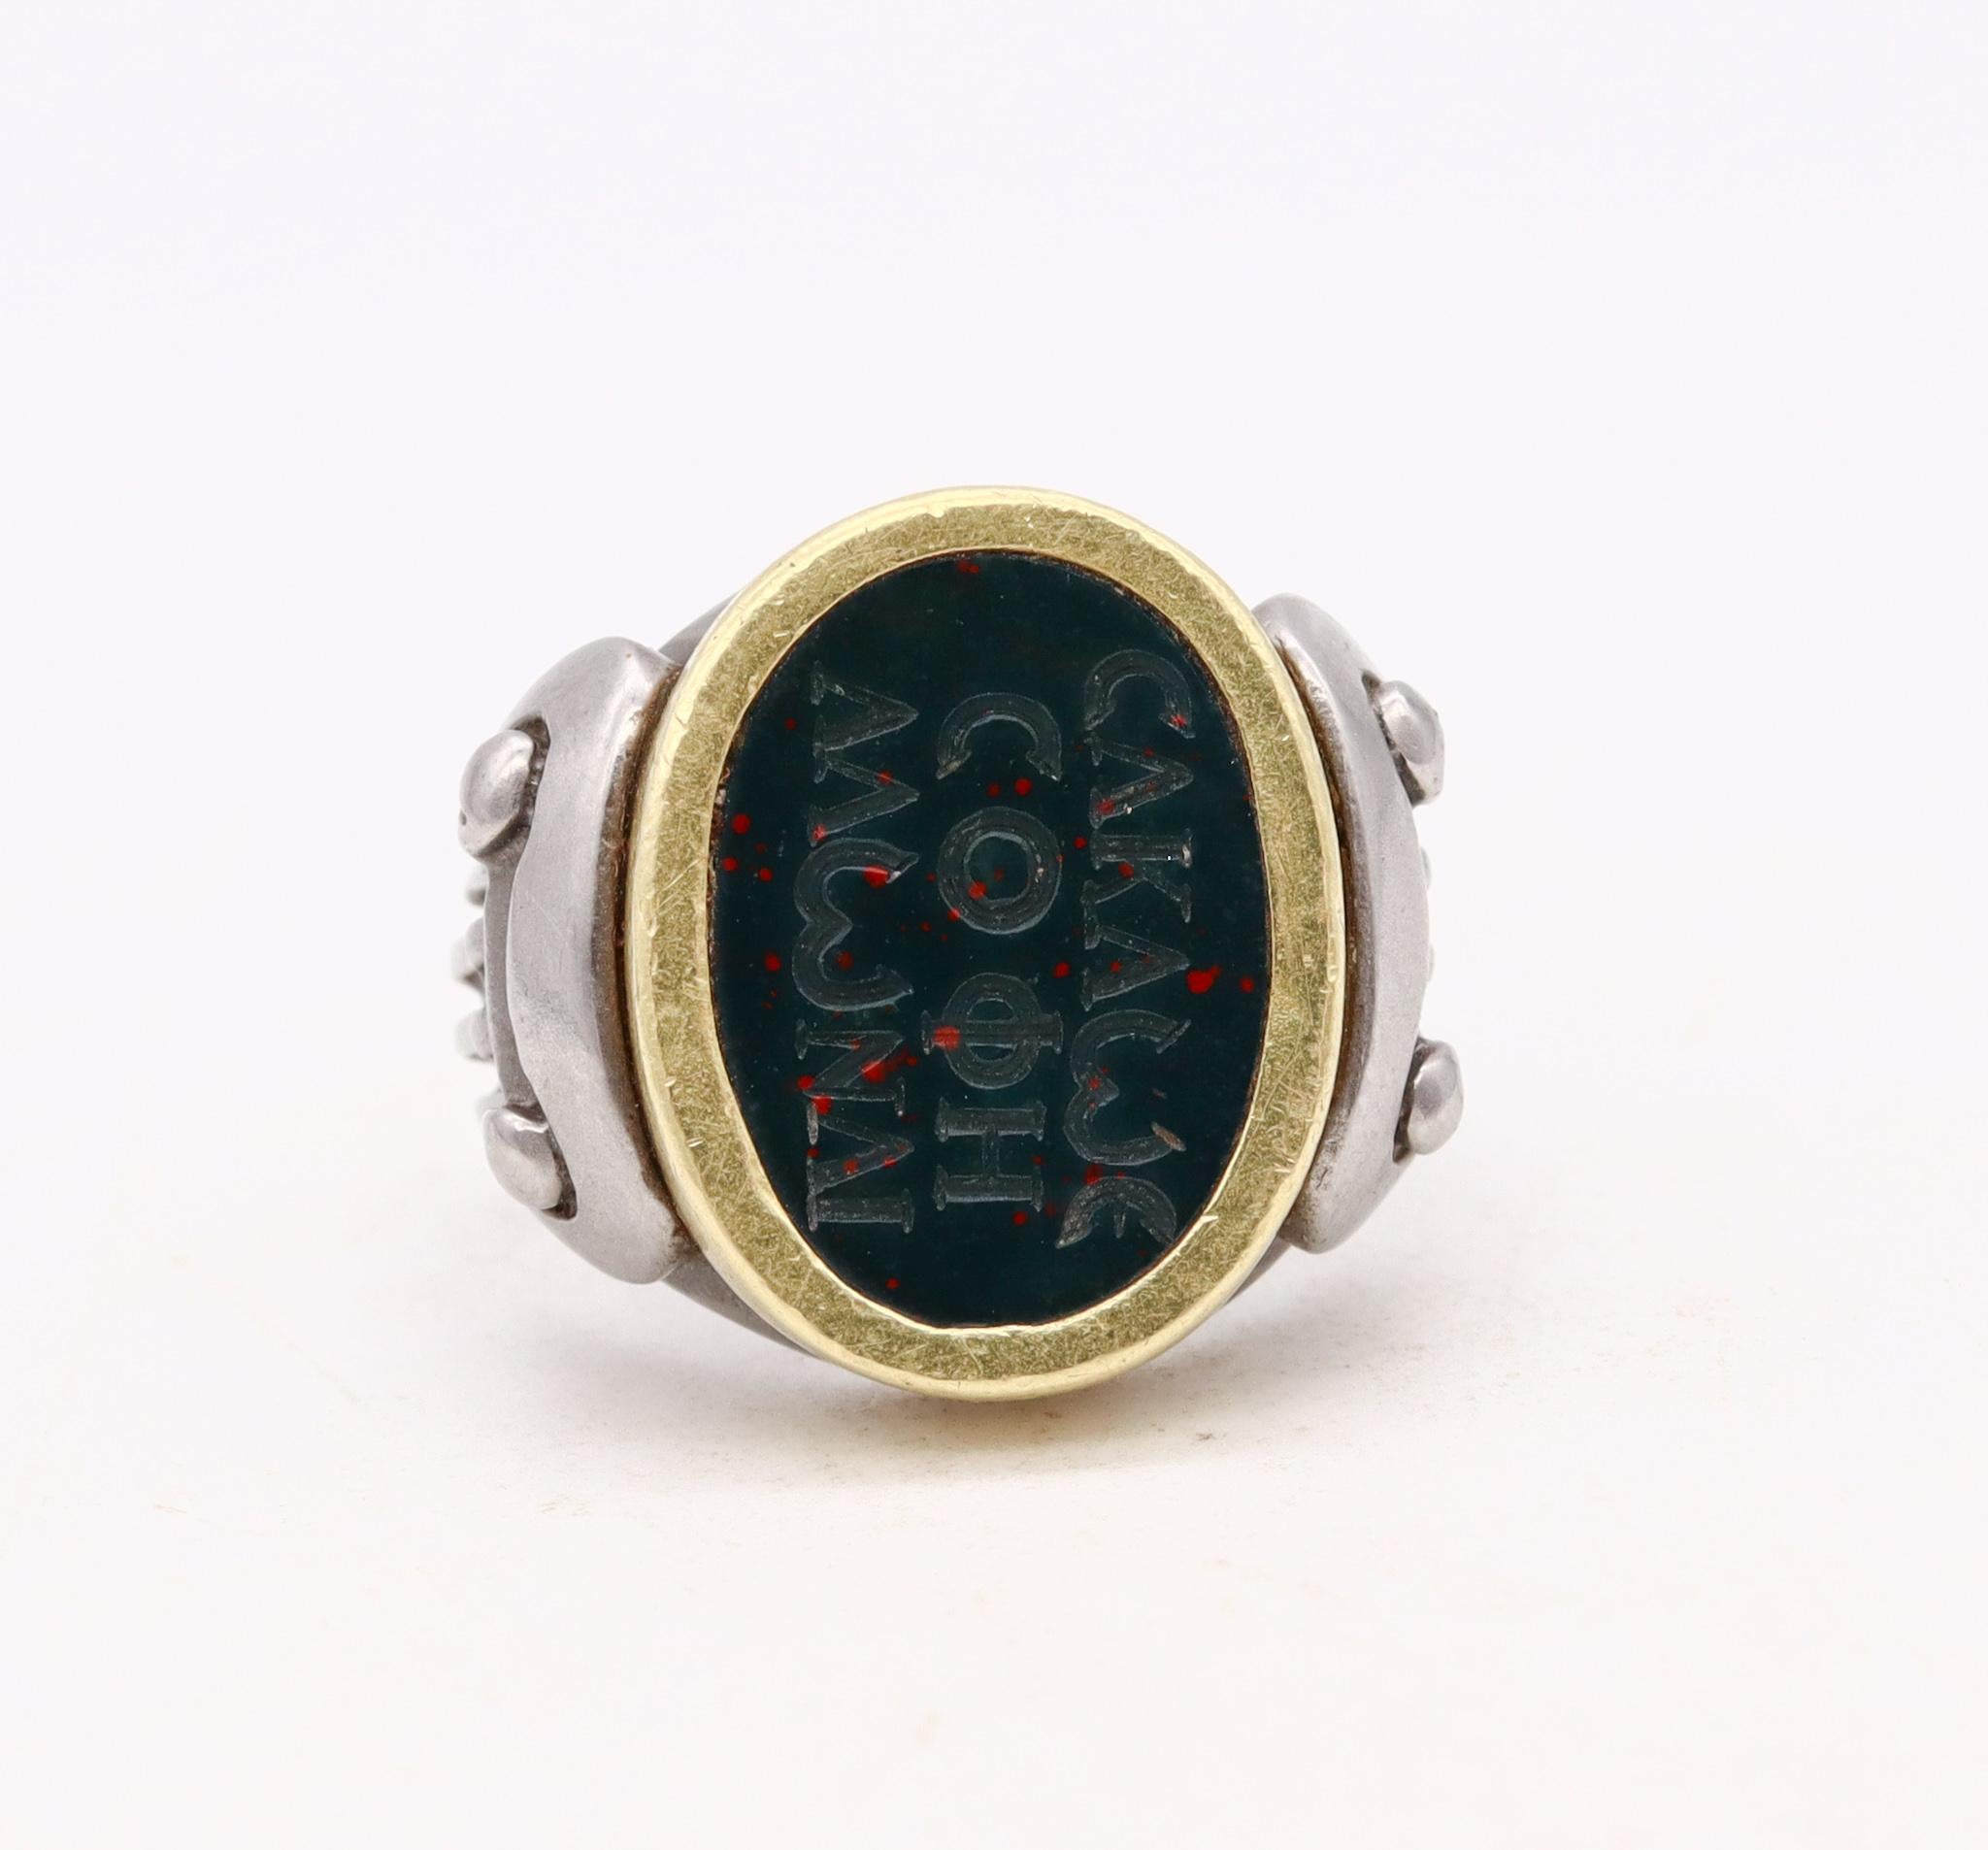 Kieselstein Cord 2000 Signet Intaglio Ring 18Kt Yellow Gold and Steel Bloodstone 2